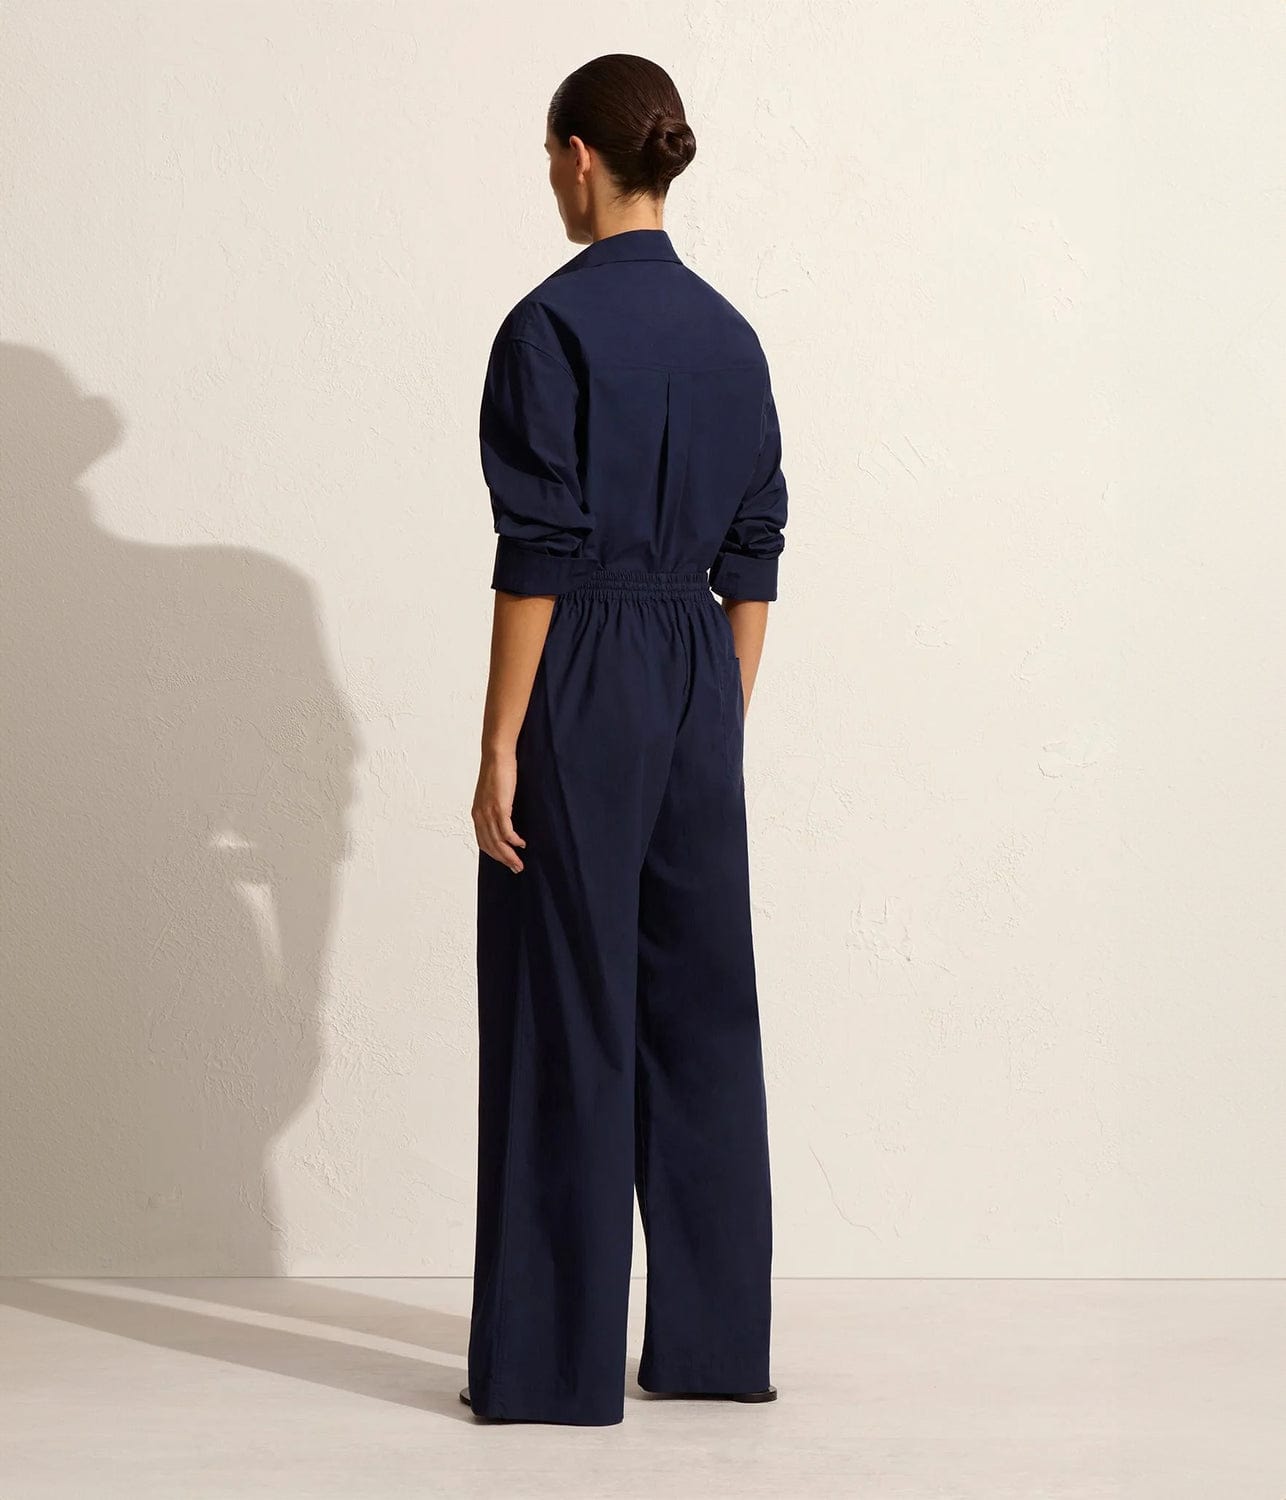 RELAXED PANT- NAVY | MATTEAU |  MATTEAU RELAXED PANT- NAVY